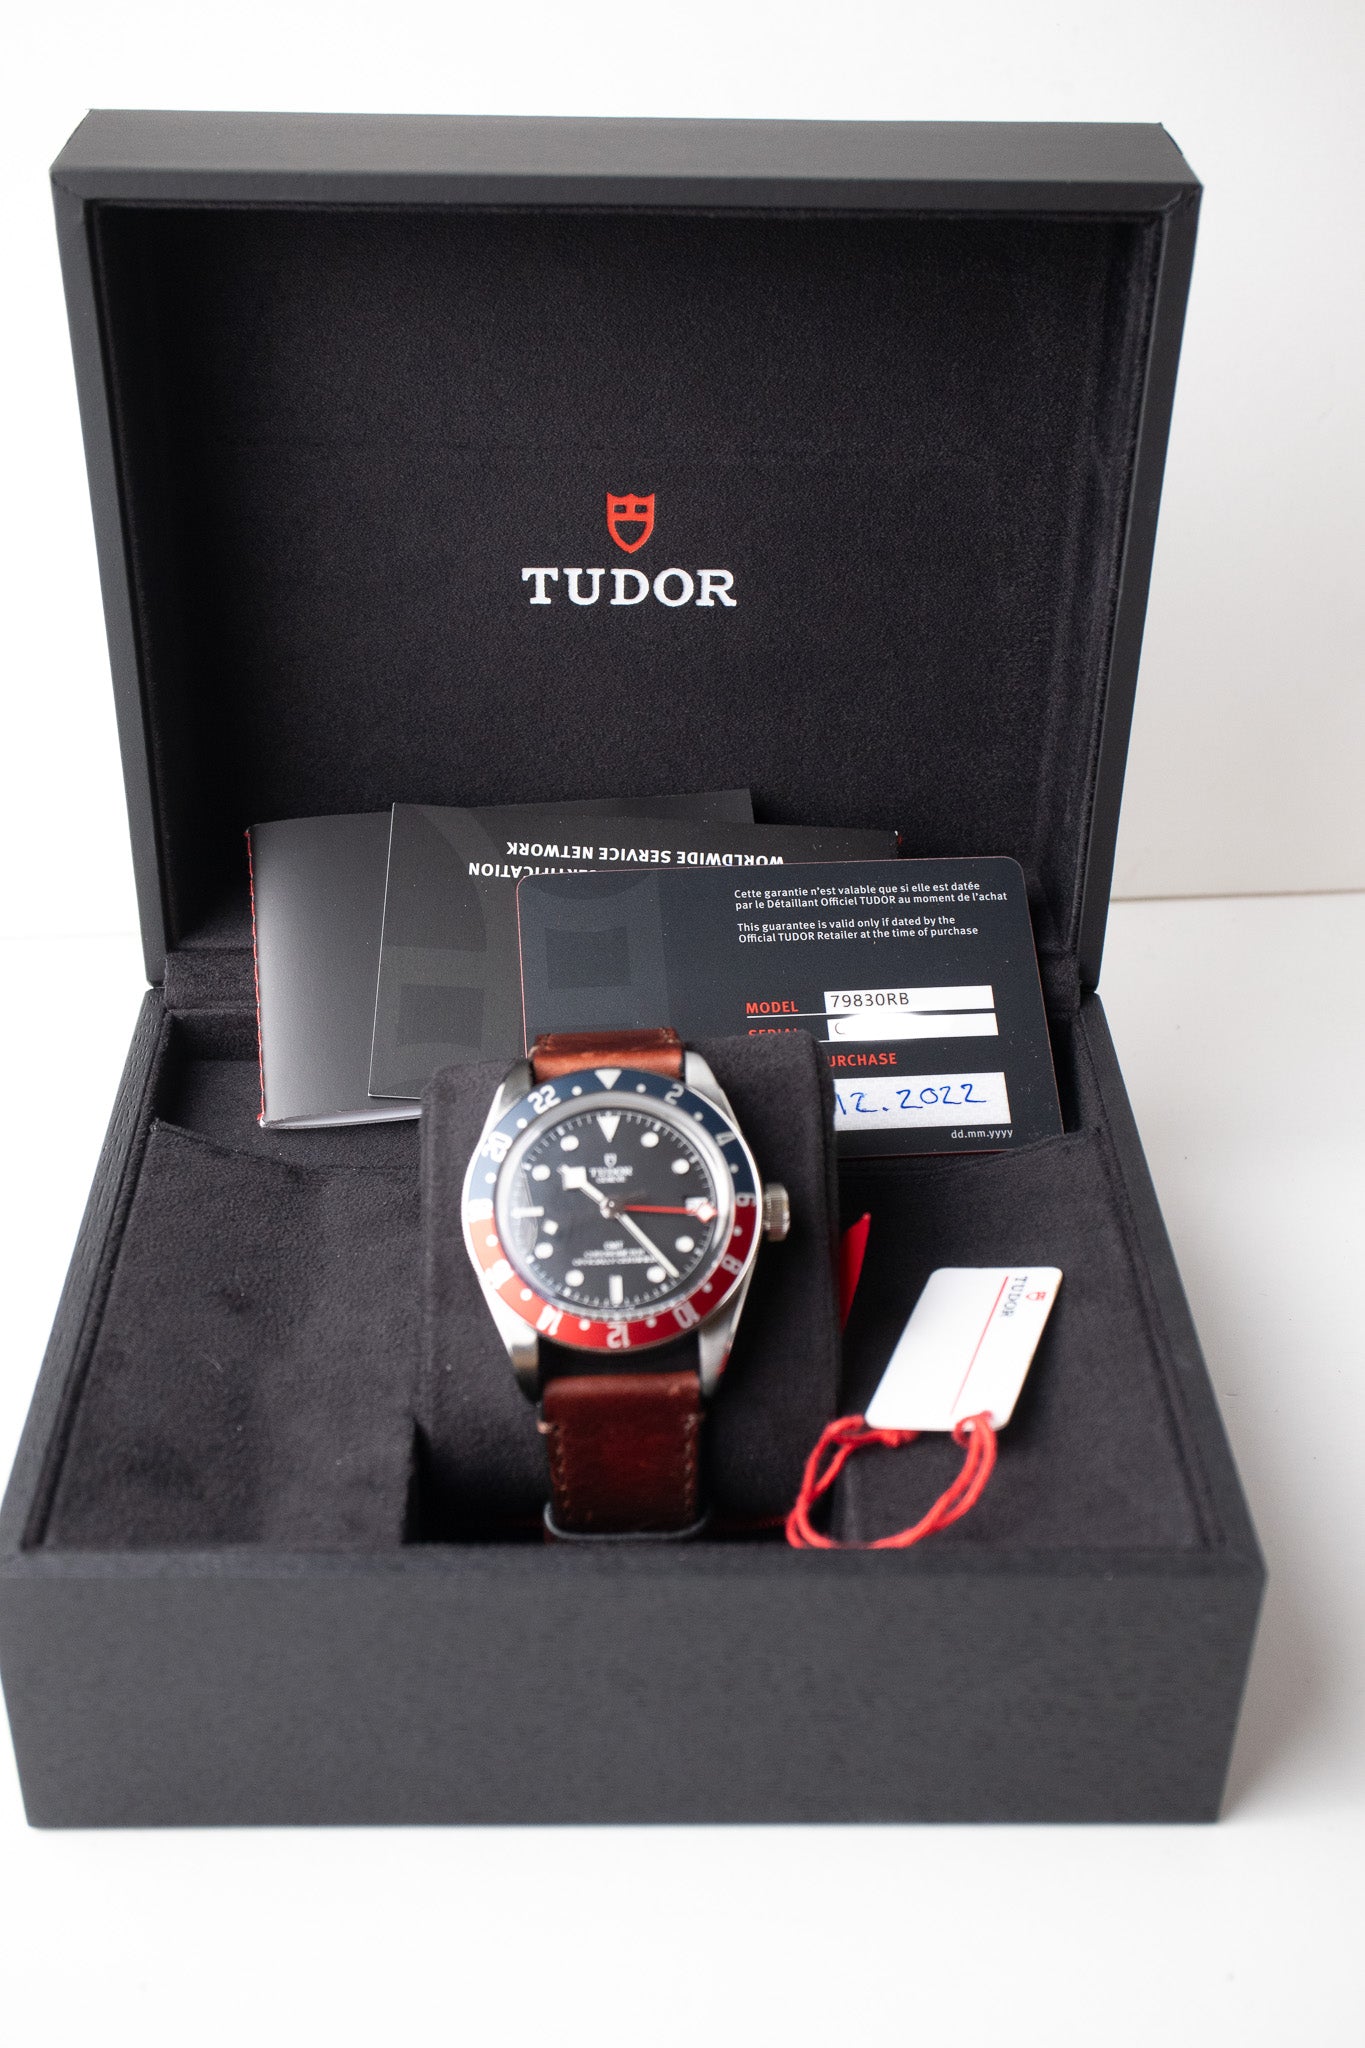 Tudor Black Bay GMT Pepsi reference 79830RB watch box, hang tag, booklets, warranty card and watch